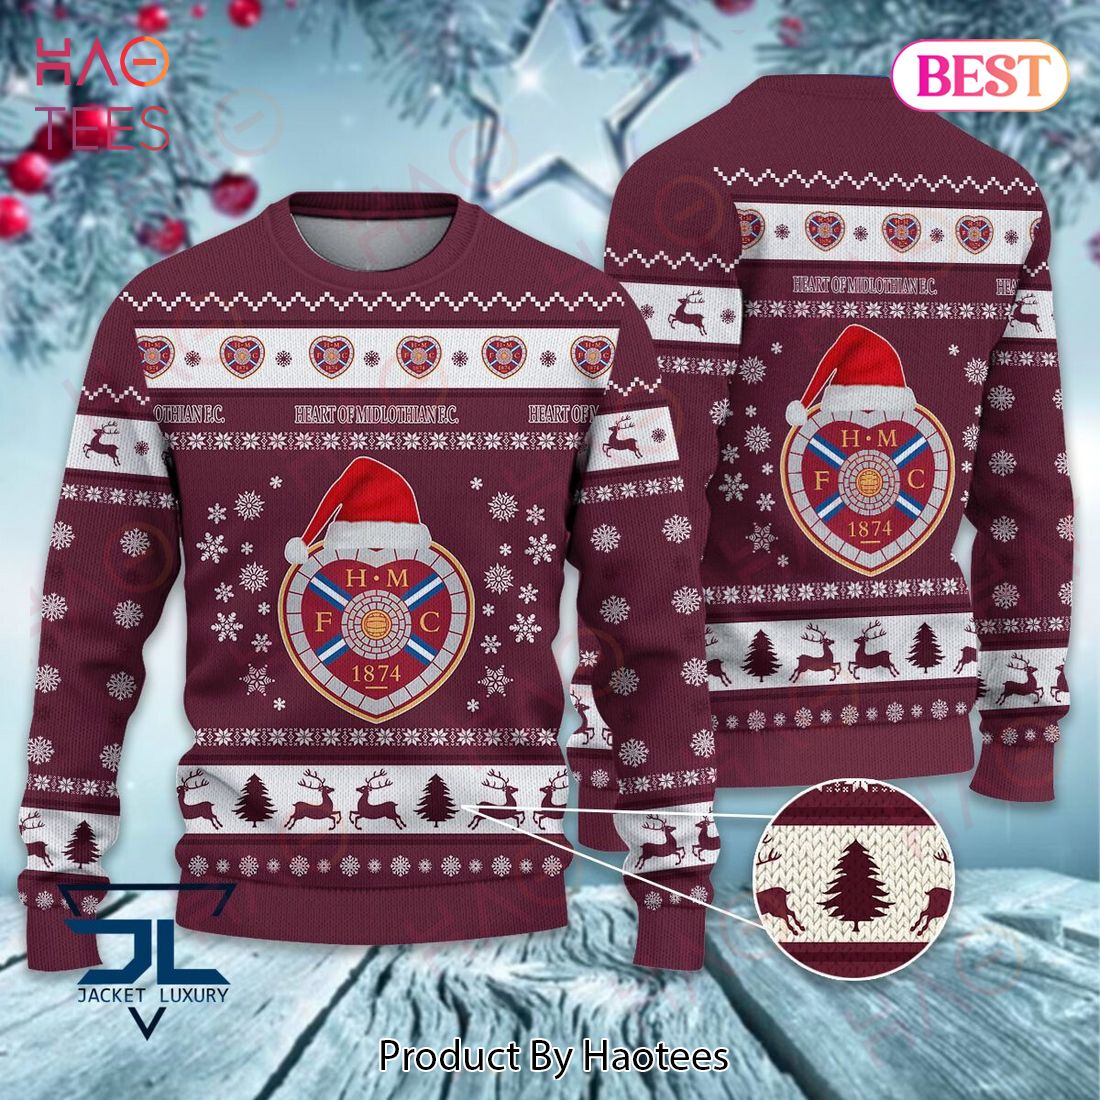 Heart of Midlothian F.C 1874 Luxury Brand Sweater Limited Edition